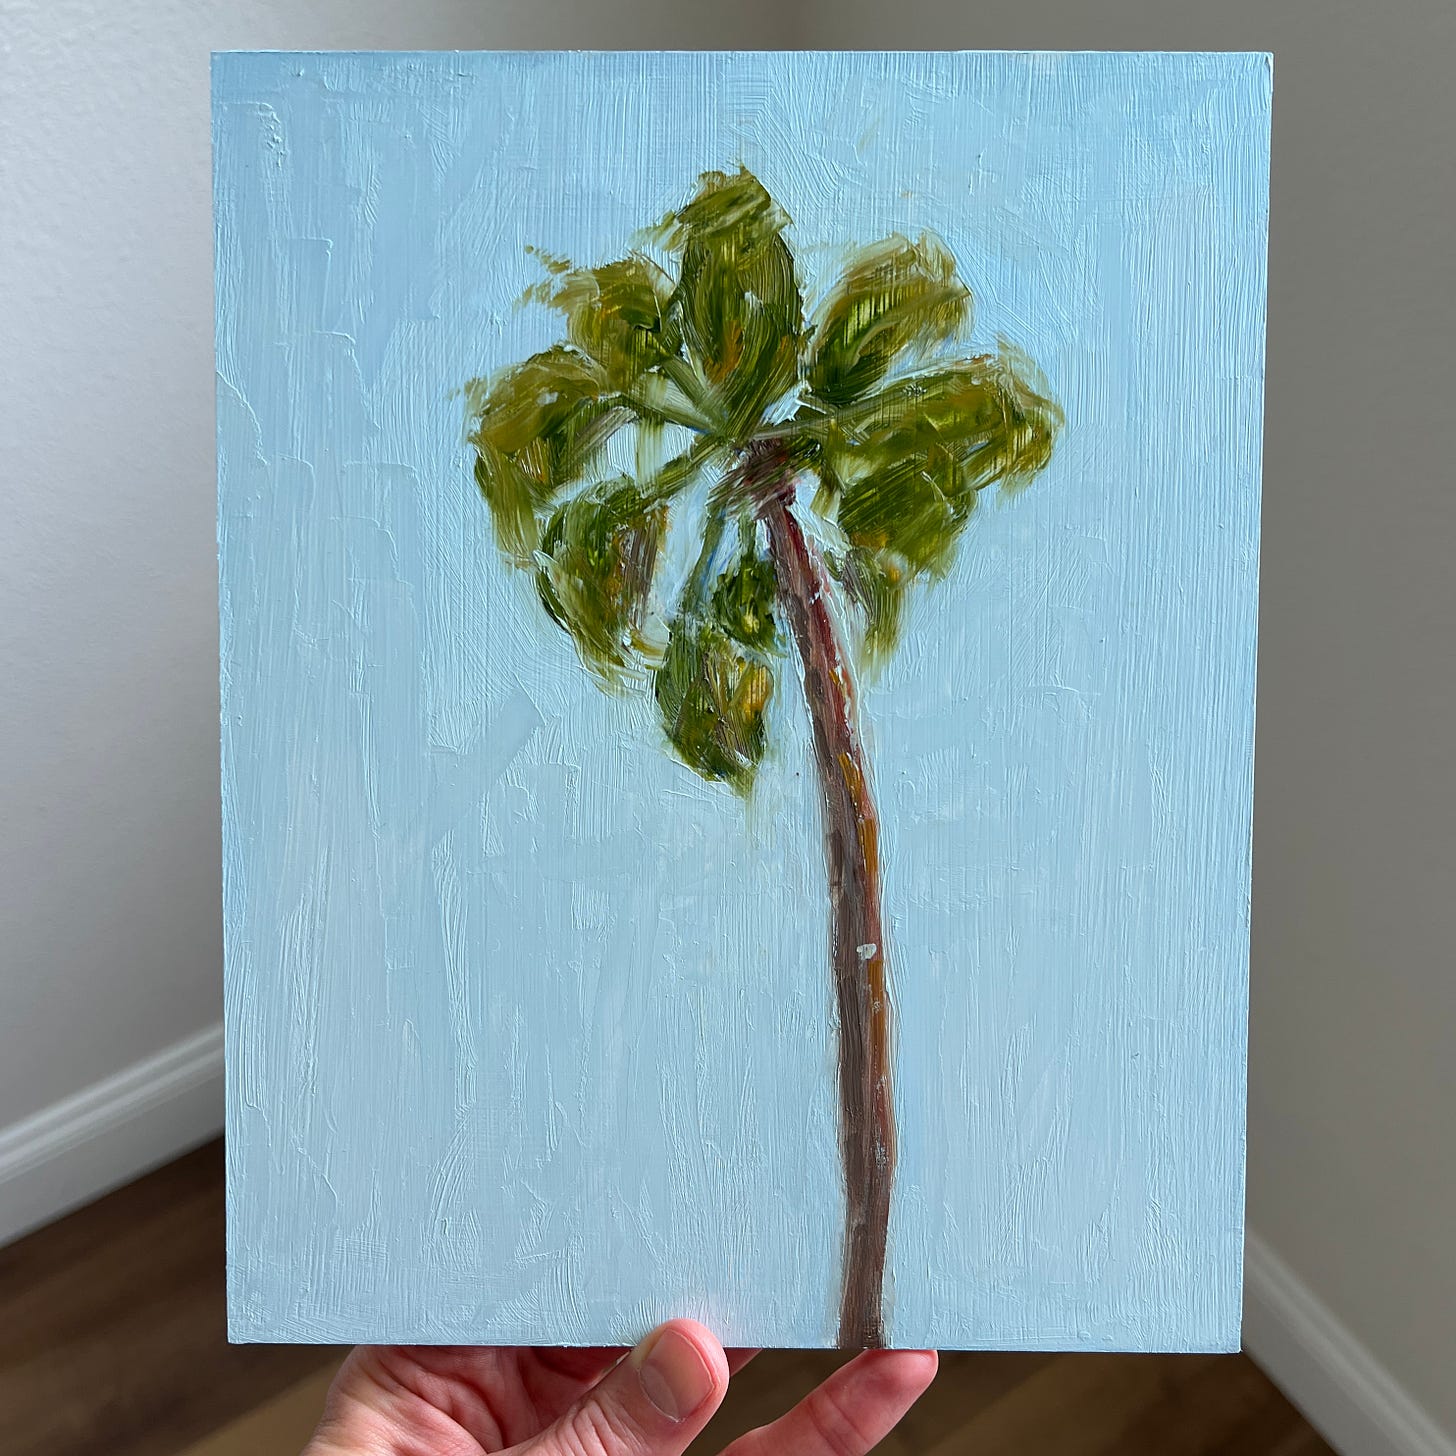 An oil panting showing a tall, skinny palm tree with blue sky in the background.